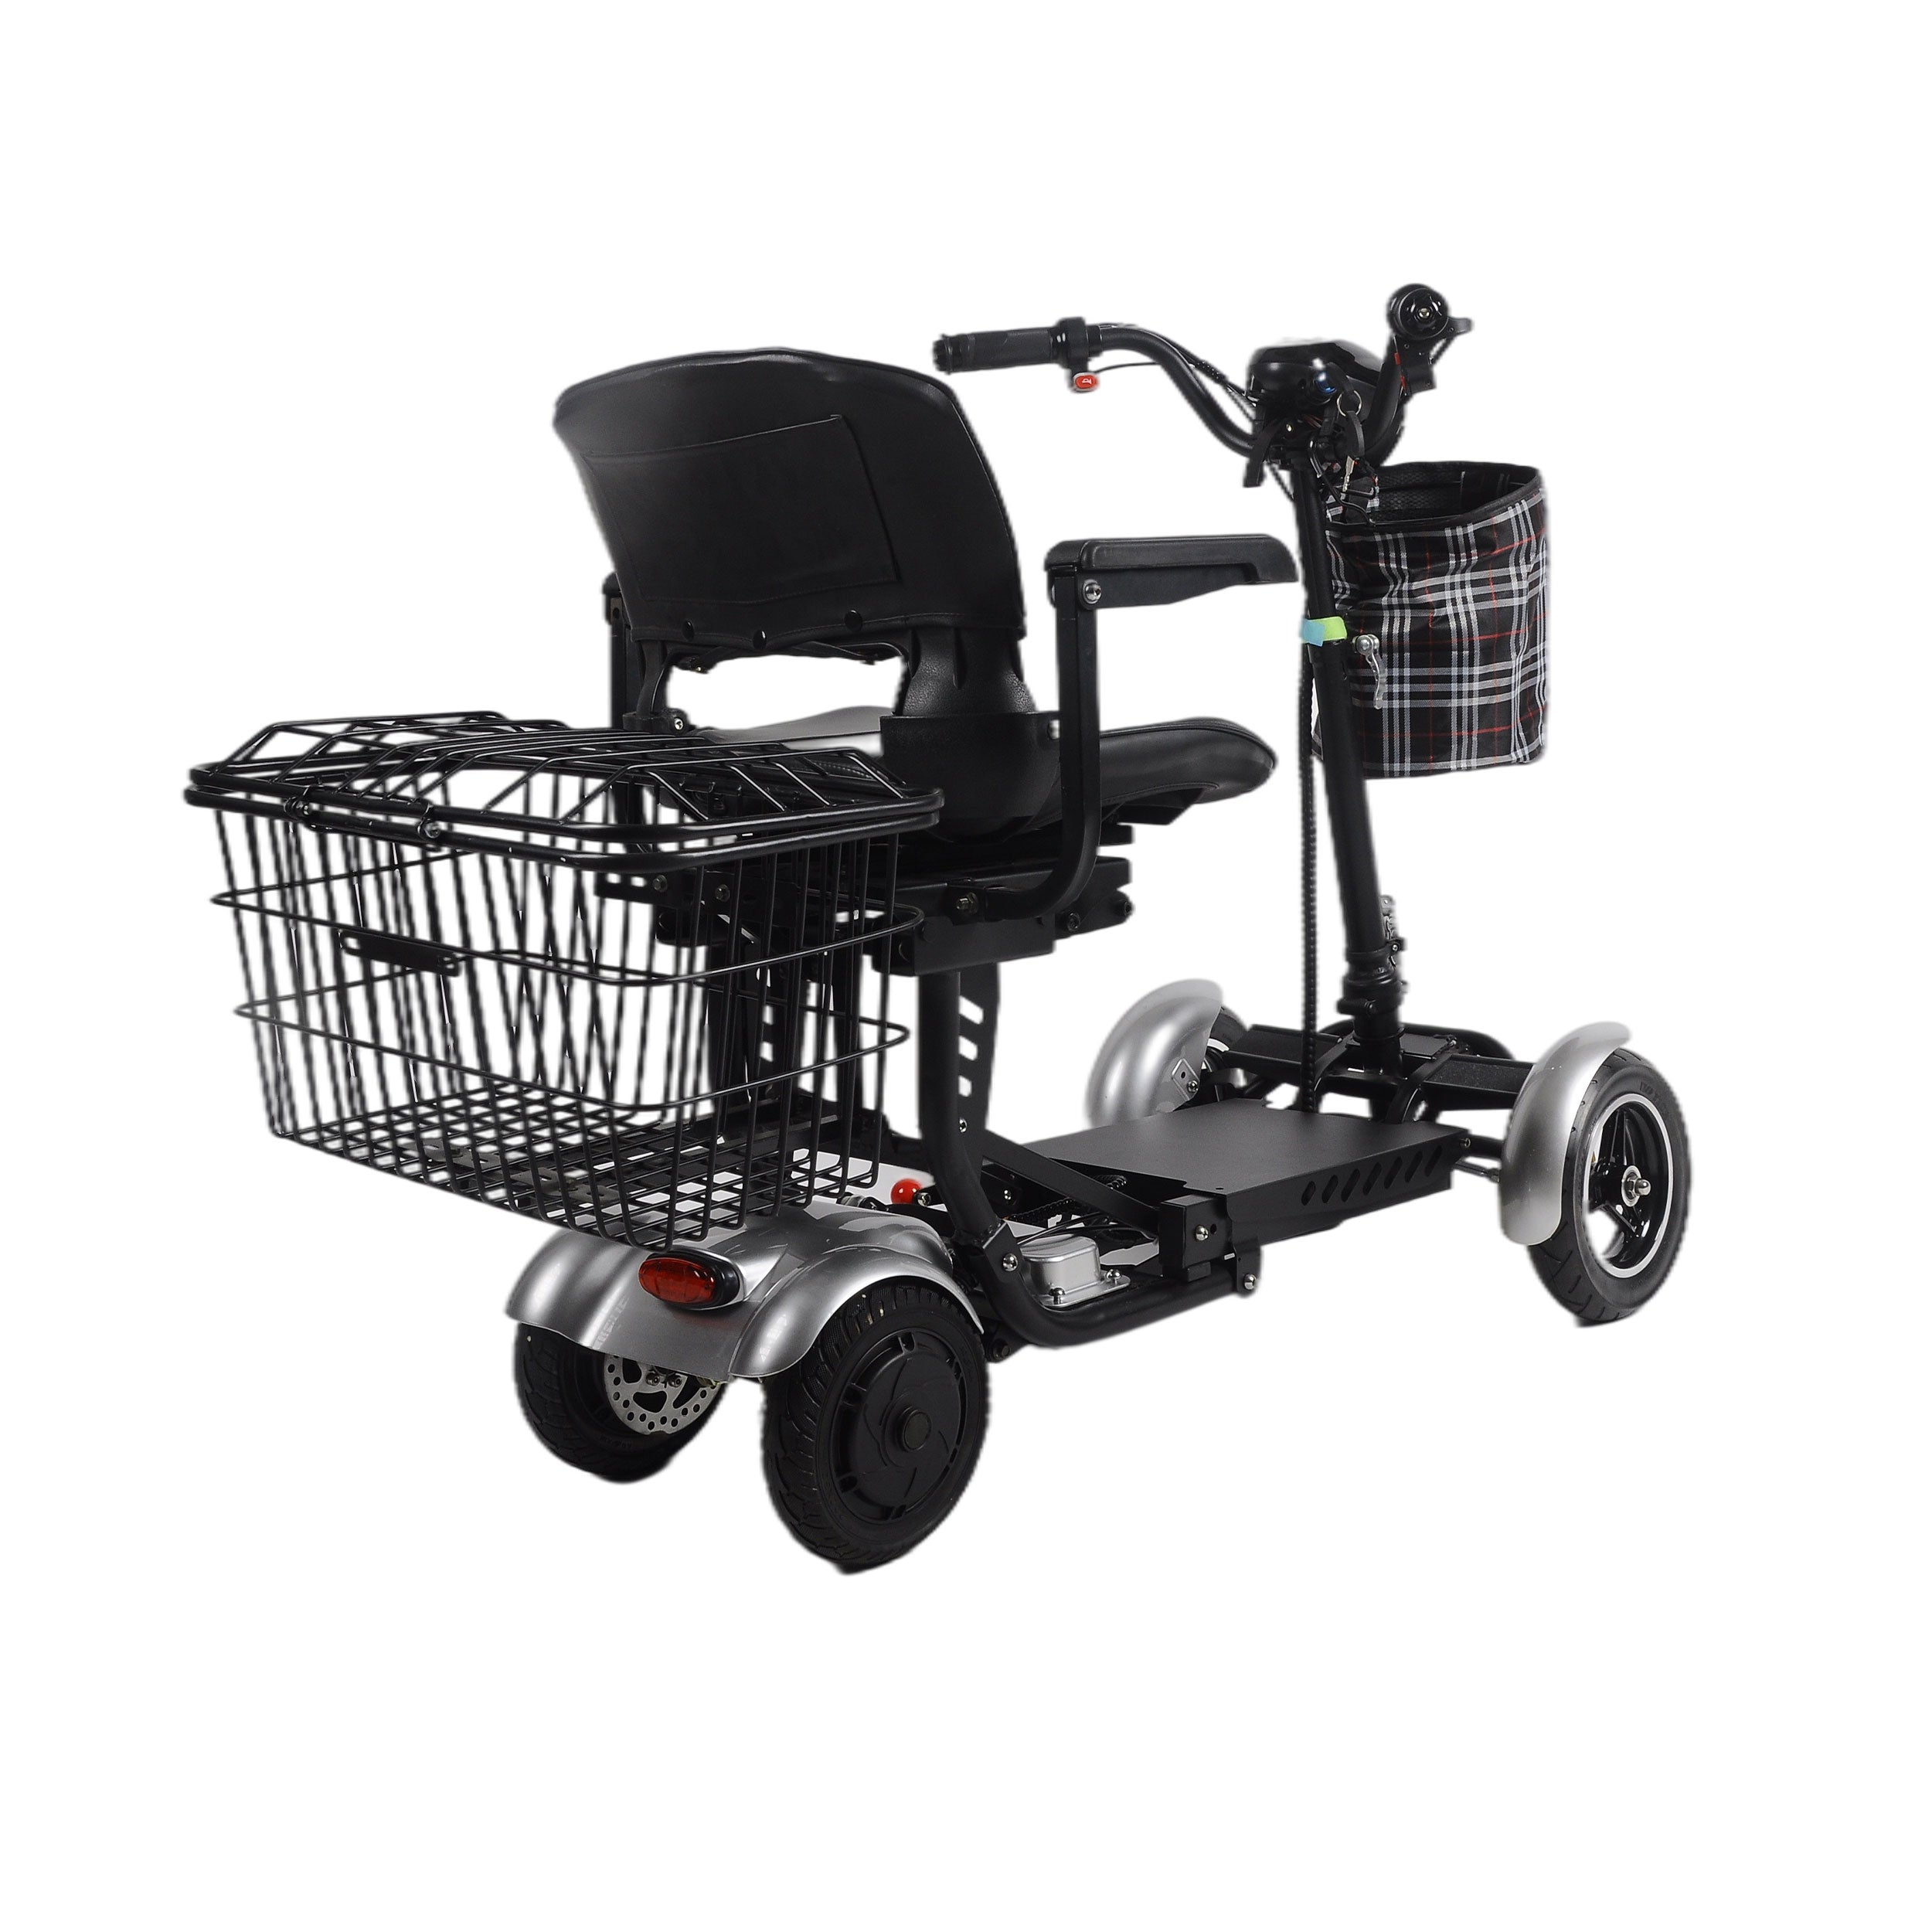 Rubicon best mobility scooters